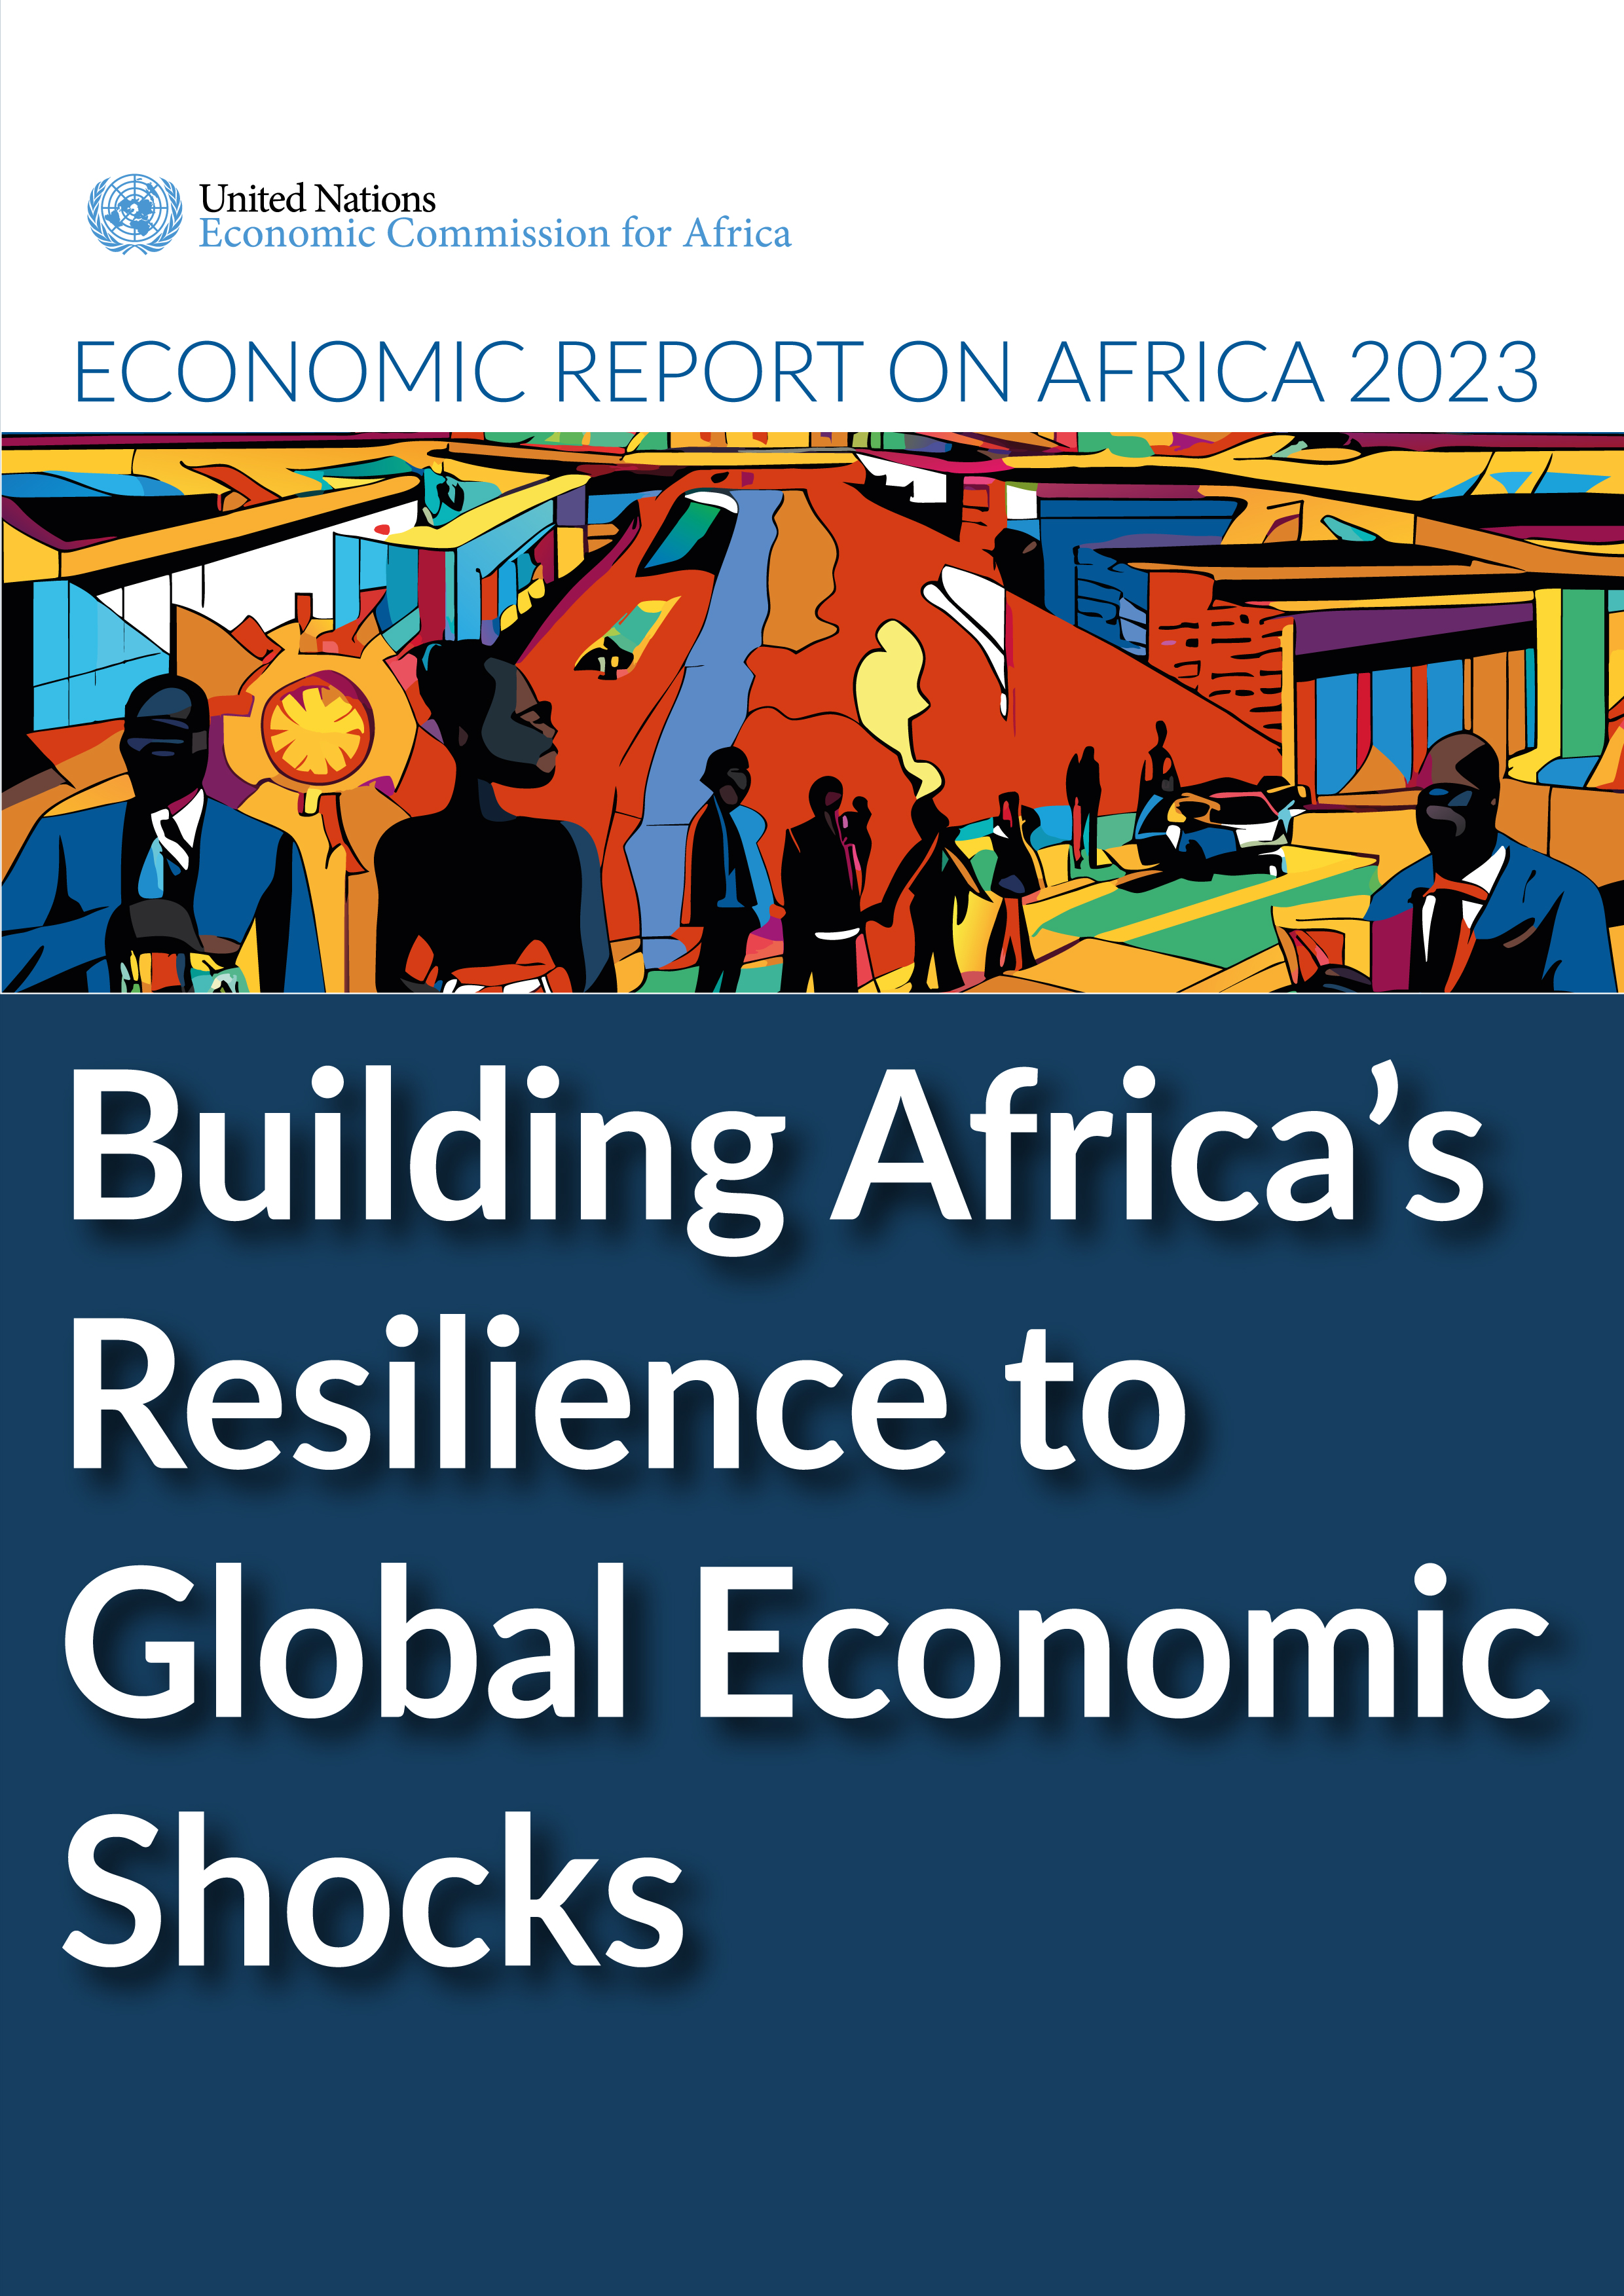 image of Economic Report on Africa 2023